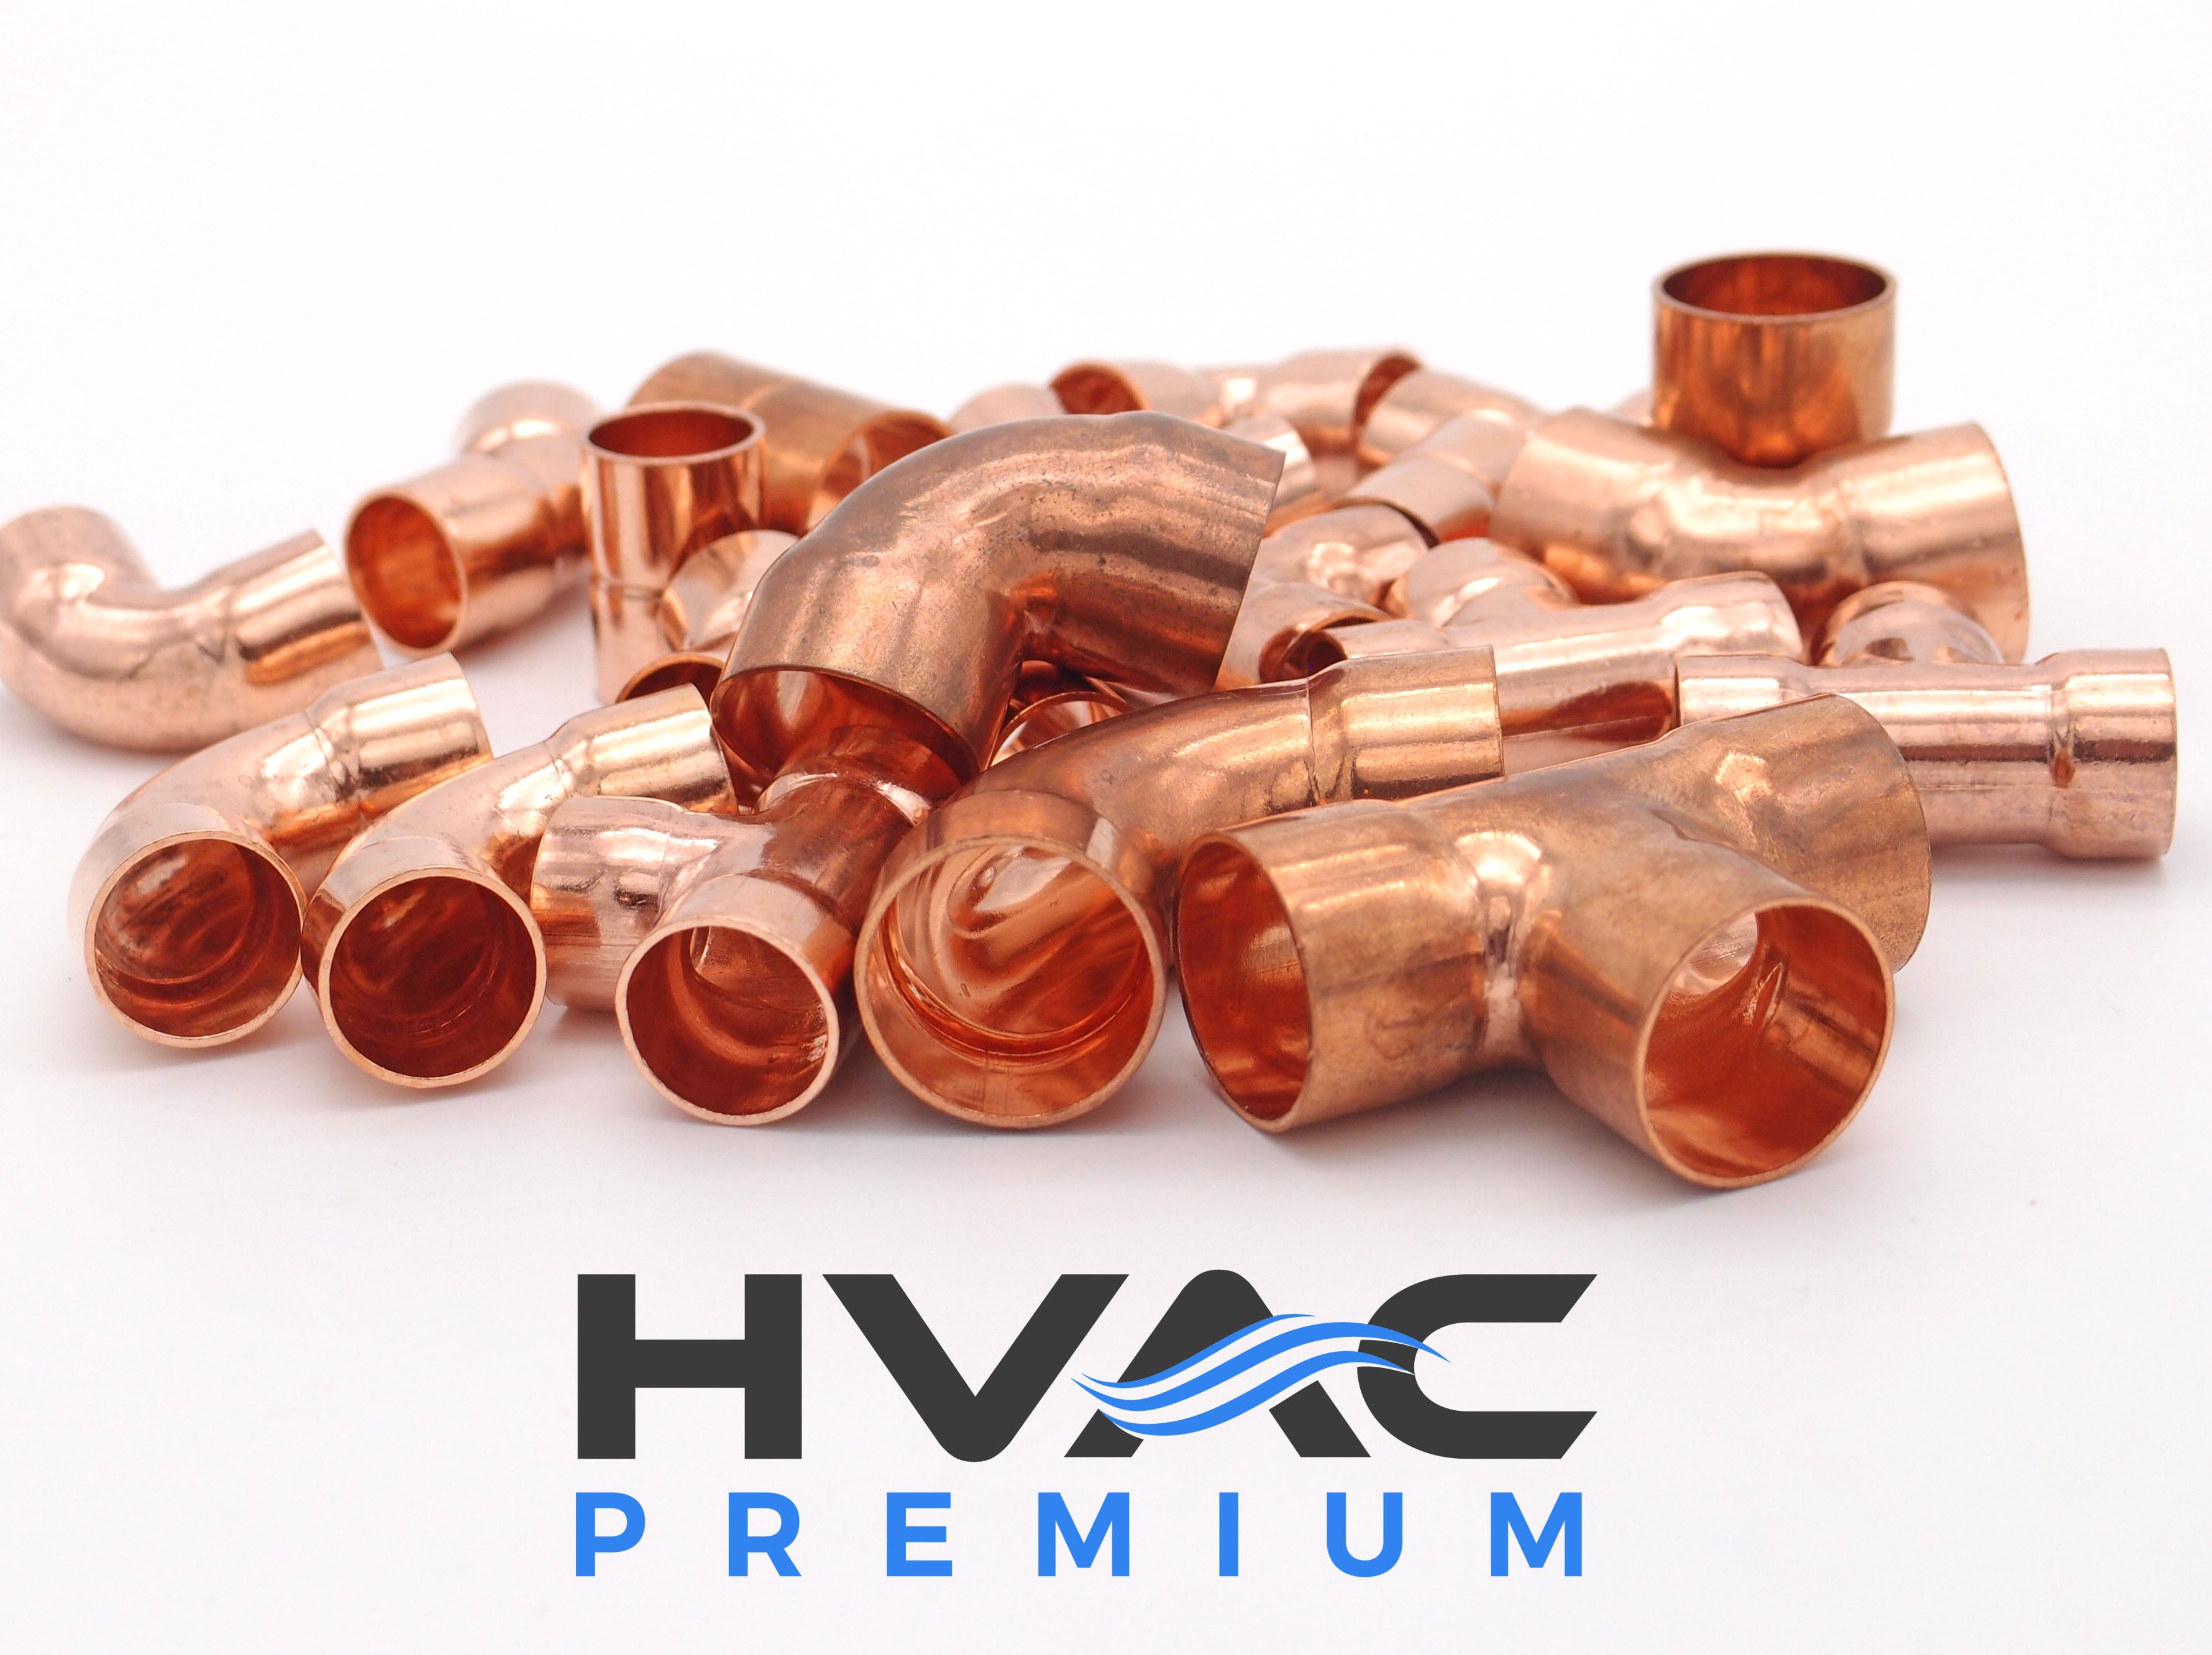 Copper Fitting 1/2 Inch (HVAC Outer Dimension) 3/8 Inch (Plumbing Inner Dimension) - Copper Tee & HVAC – 99.9% Pure Copper - 10 Pack